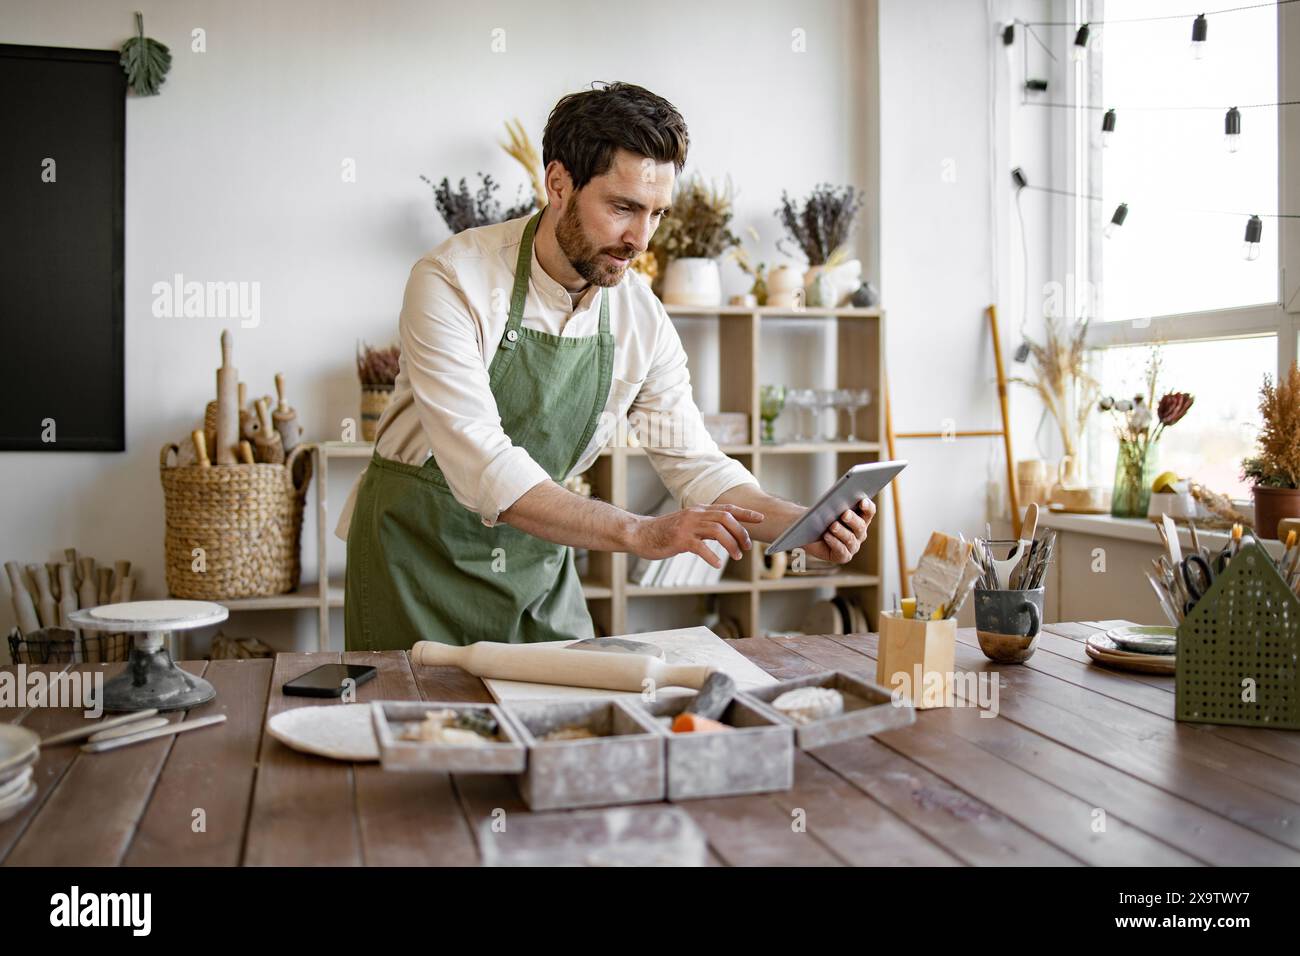 Bearded adult man in apron and white shirt viewing an online course Stock Photo